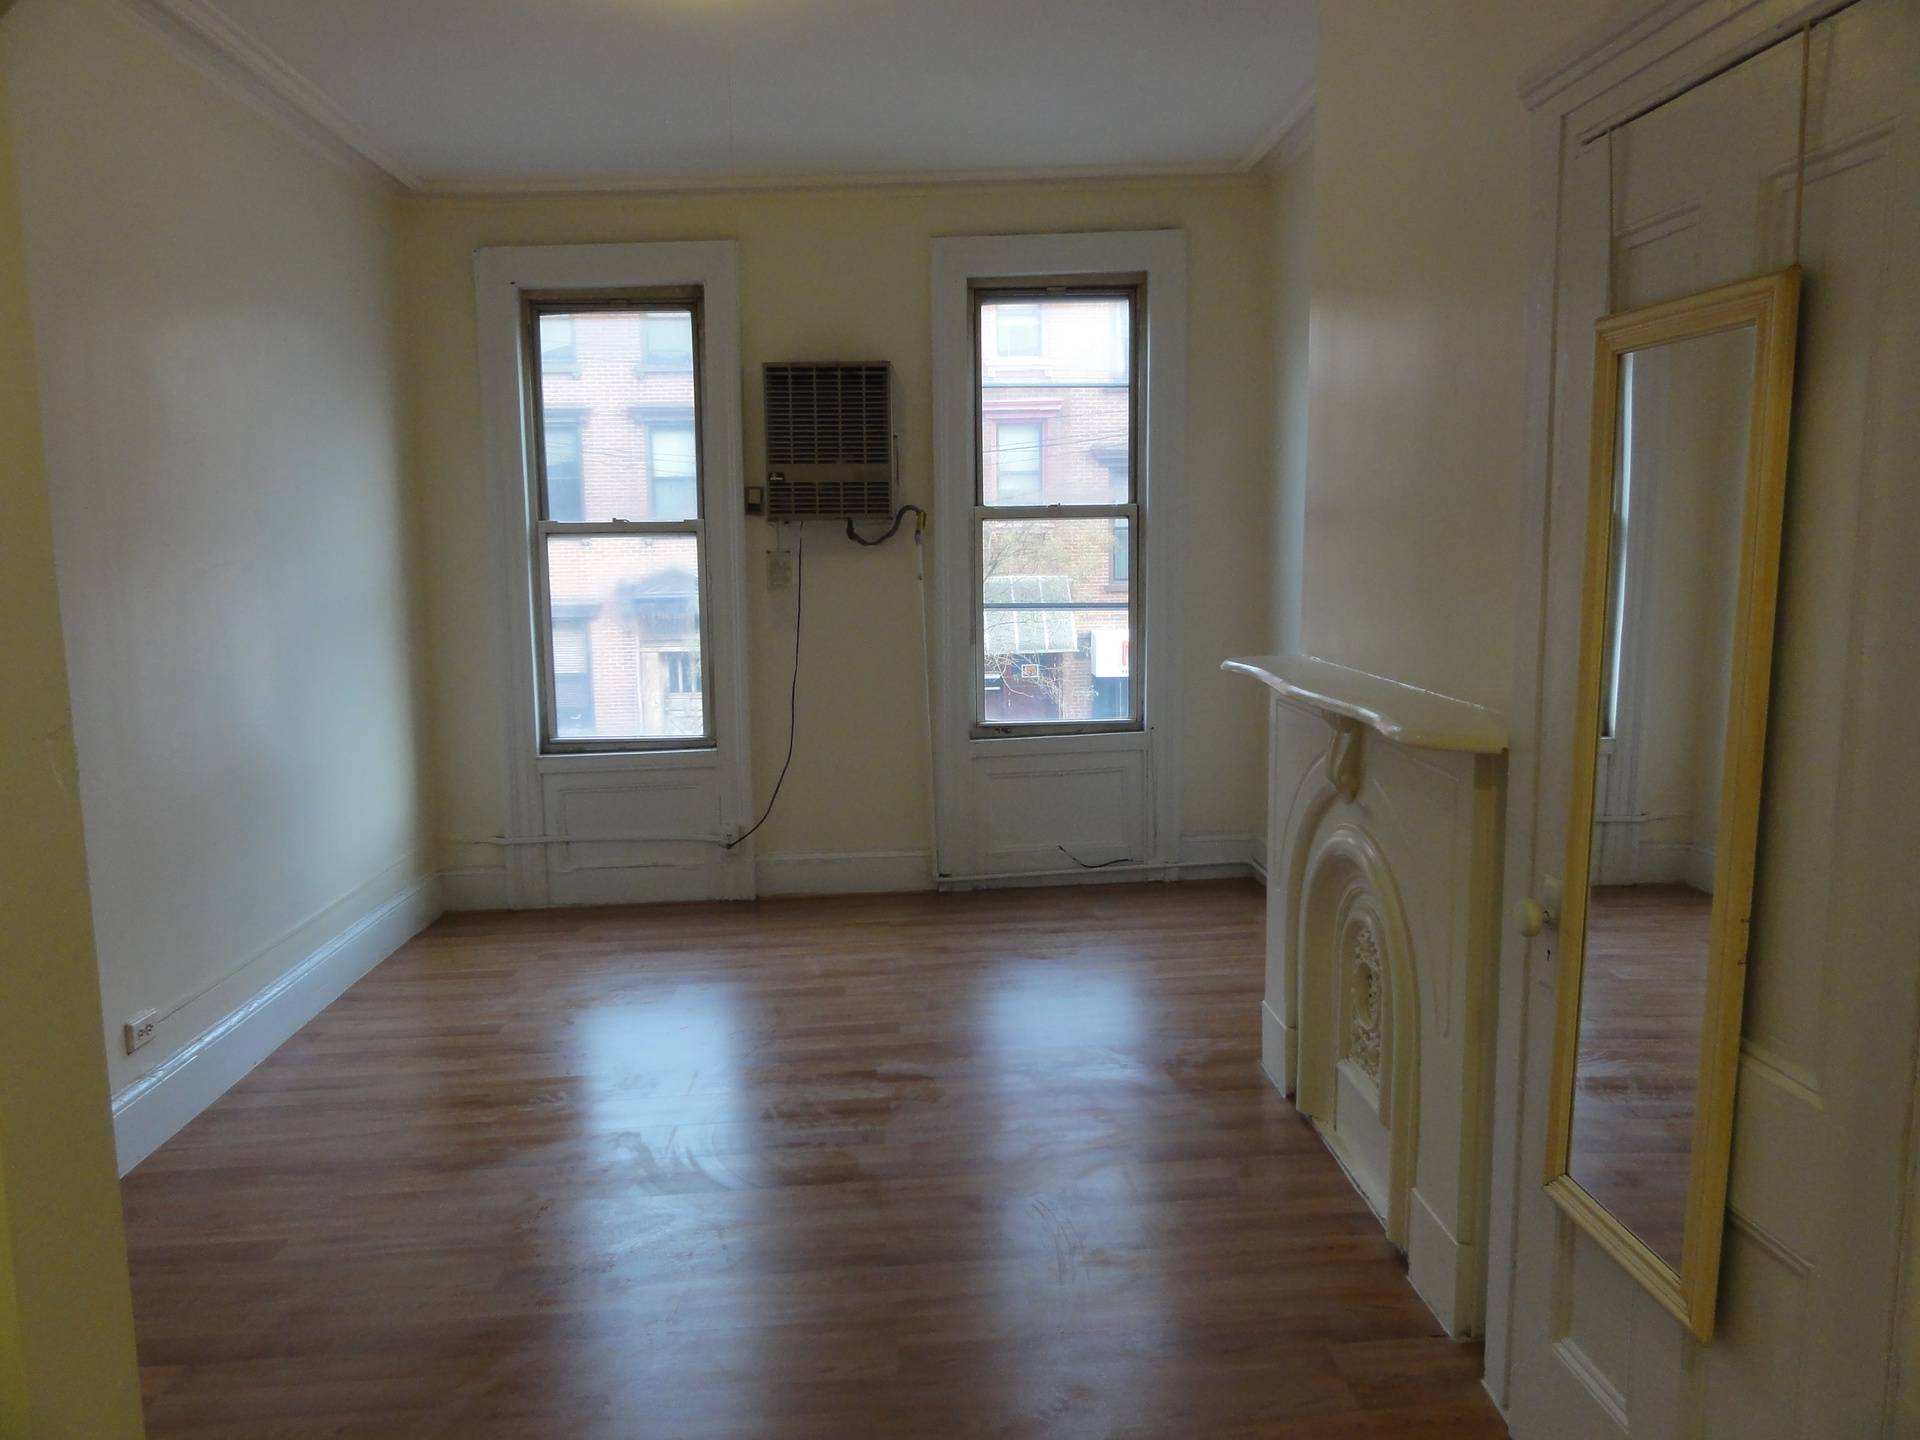 NORTHSIDE WILLIAMSBURG I Studio/1BR CONVERTIBLE A MUST SEE!!!